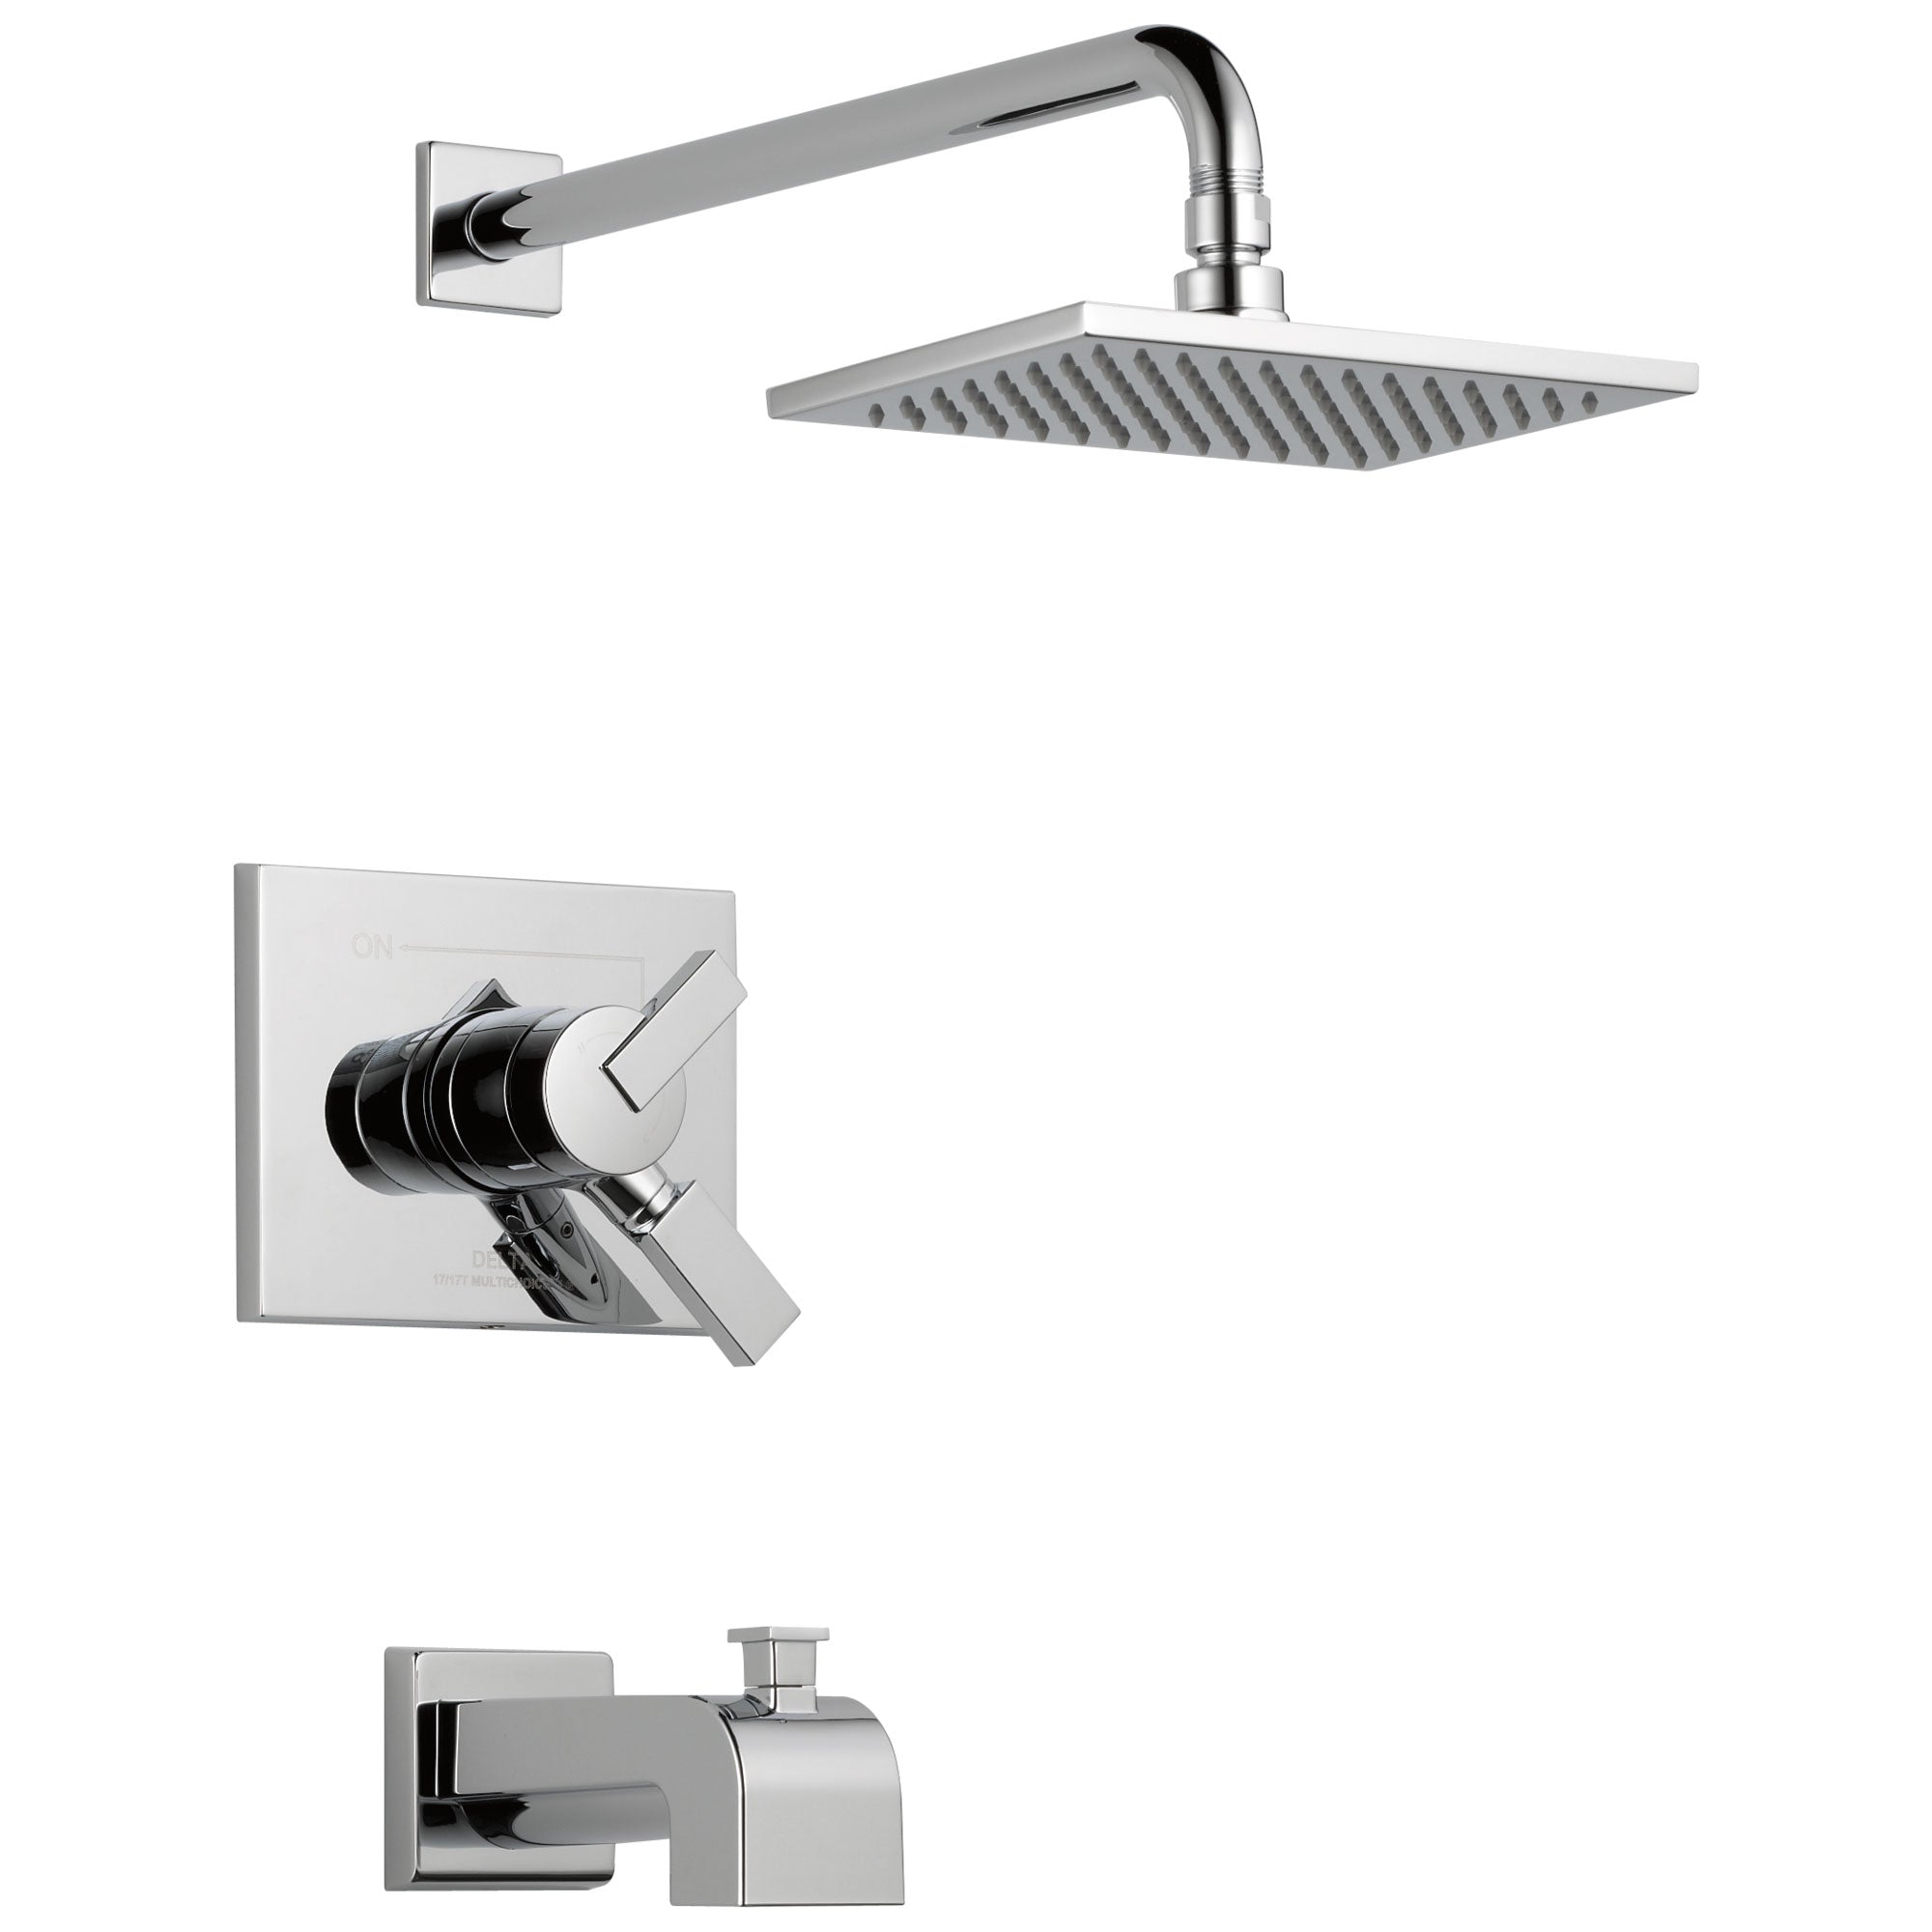 Delta Vero Chrome Finish Water Efficient Tub & Shower Combo Faucet Includes Monitor 17 Series Cartridge, Handles, and Valve without Stops D3341V